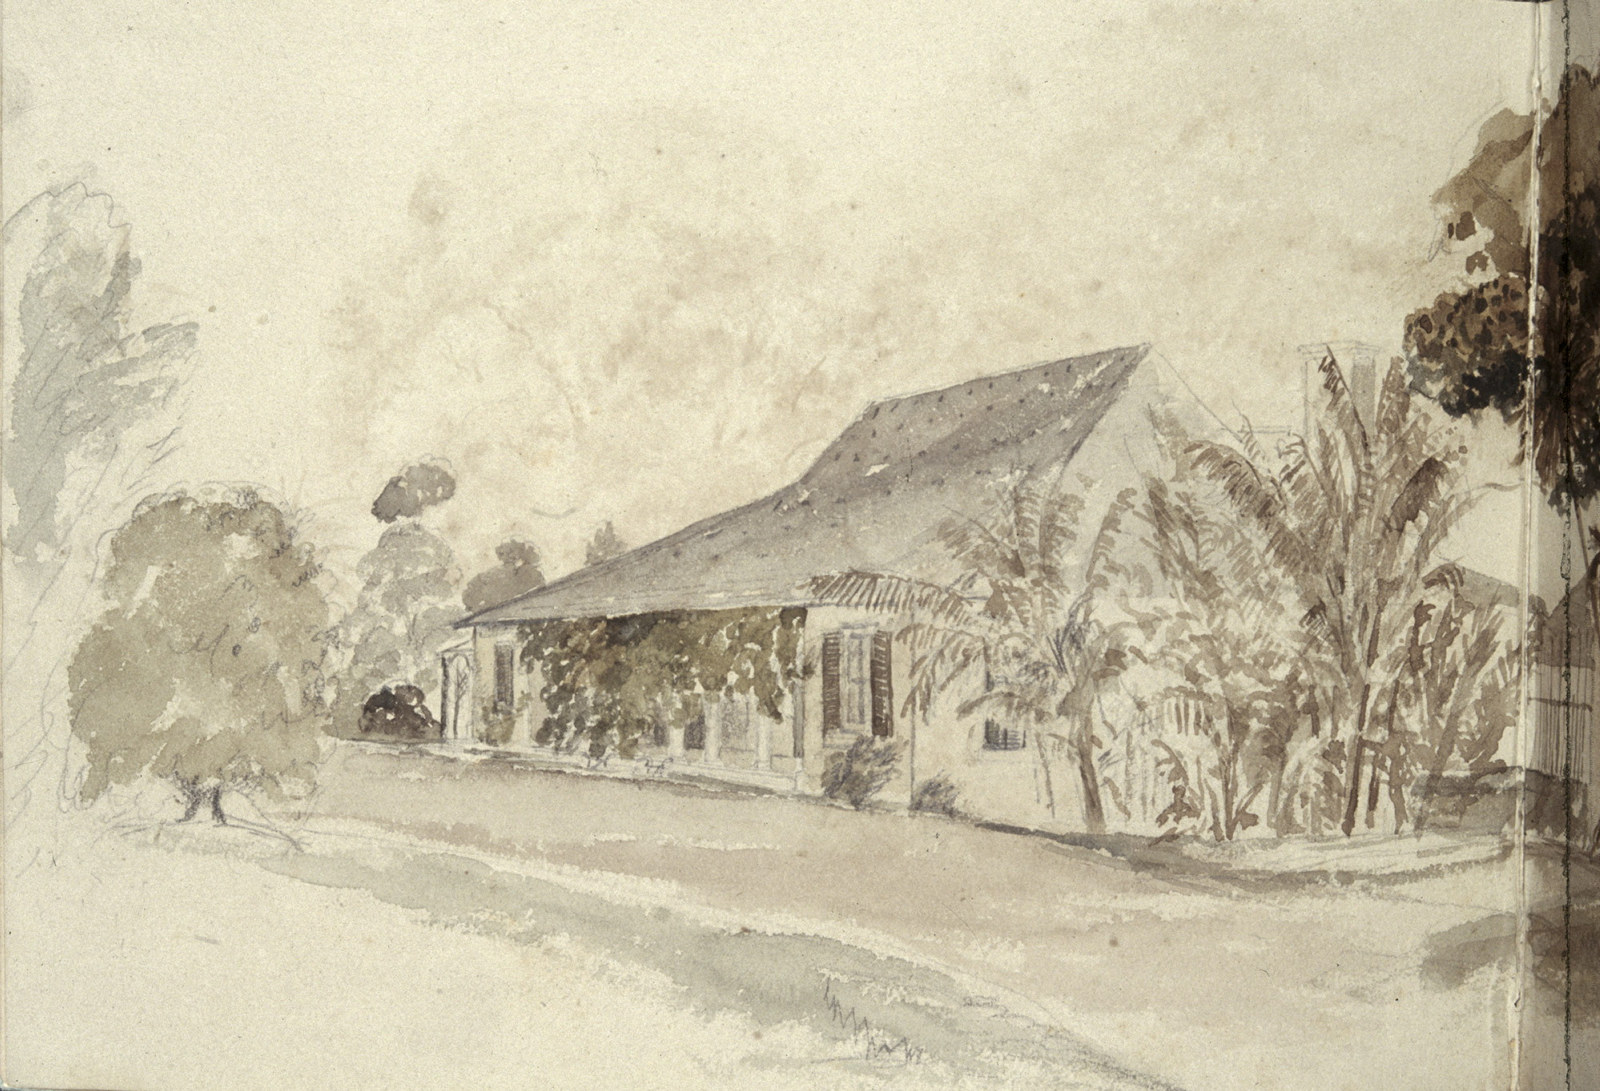 Watercolour of colonial era house with trellised verandah and trees.